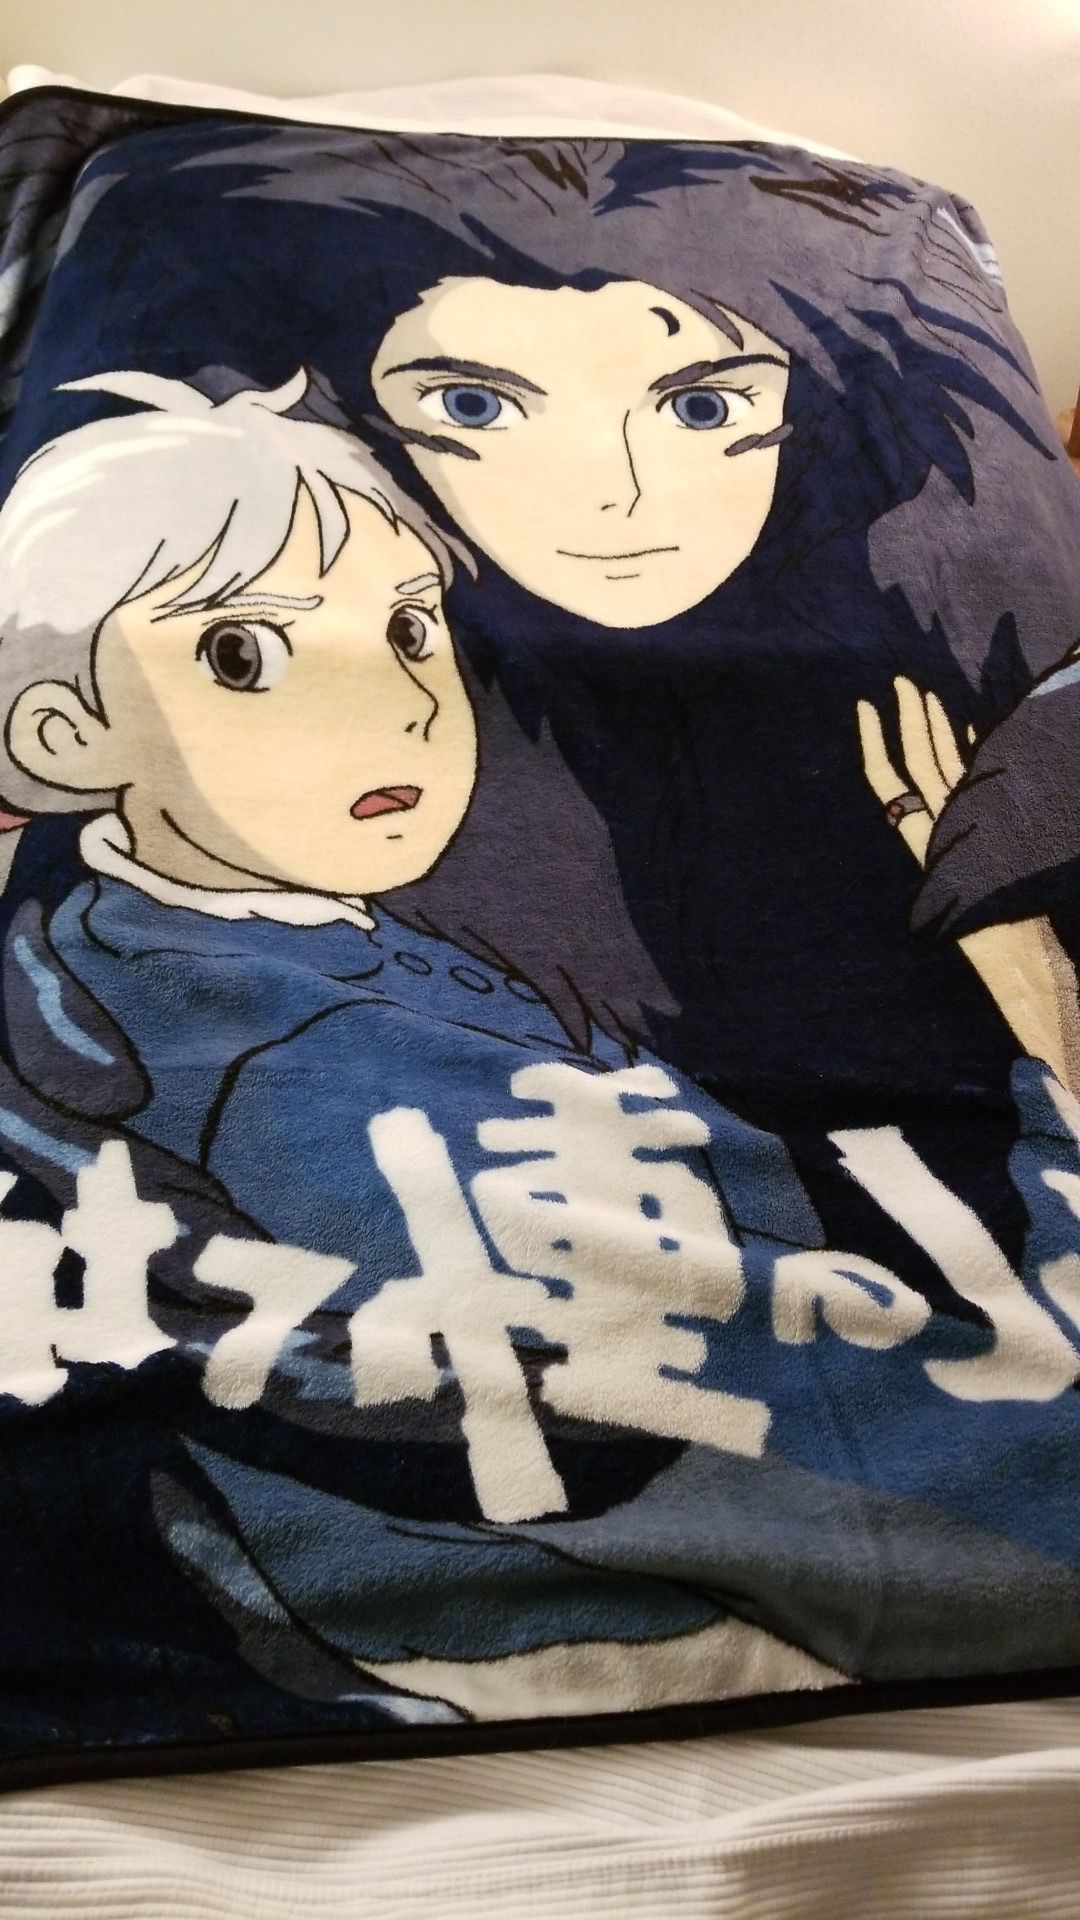 Howls moving castle throw blanket